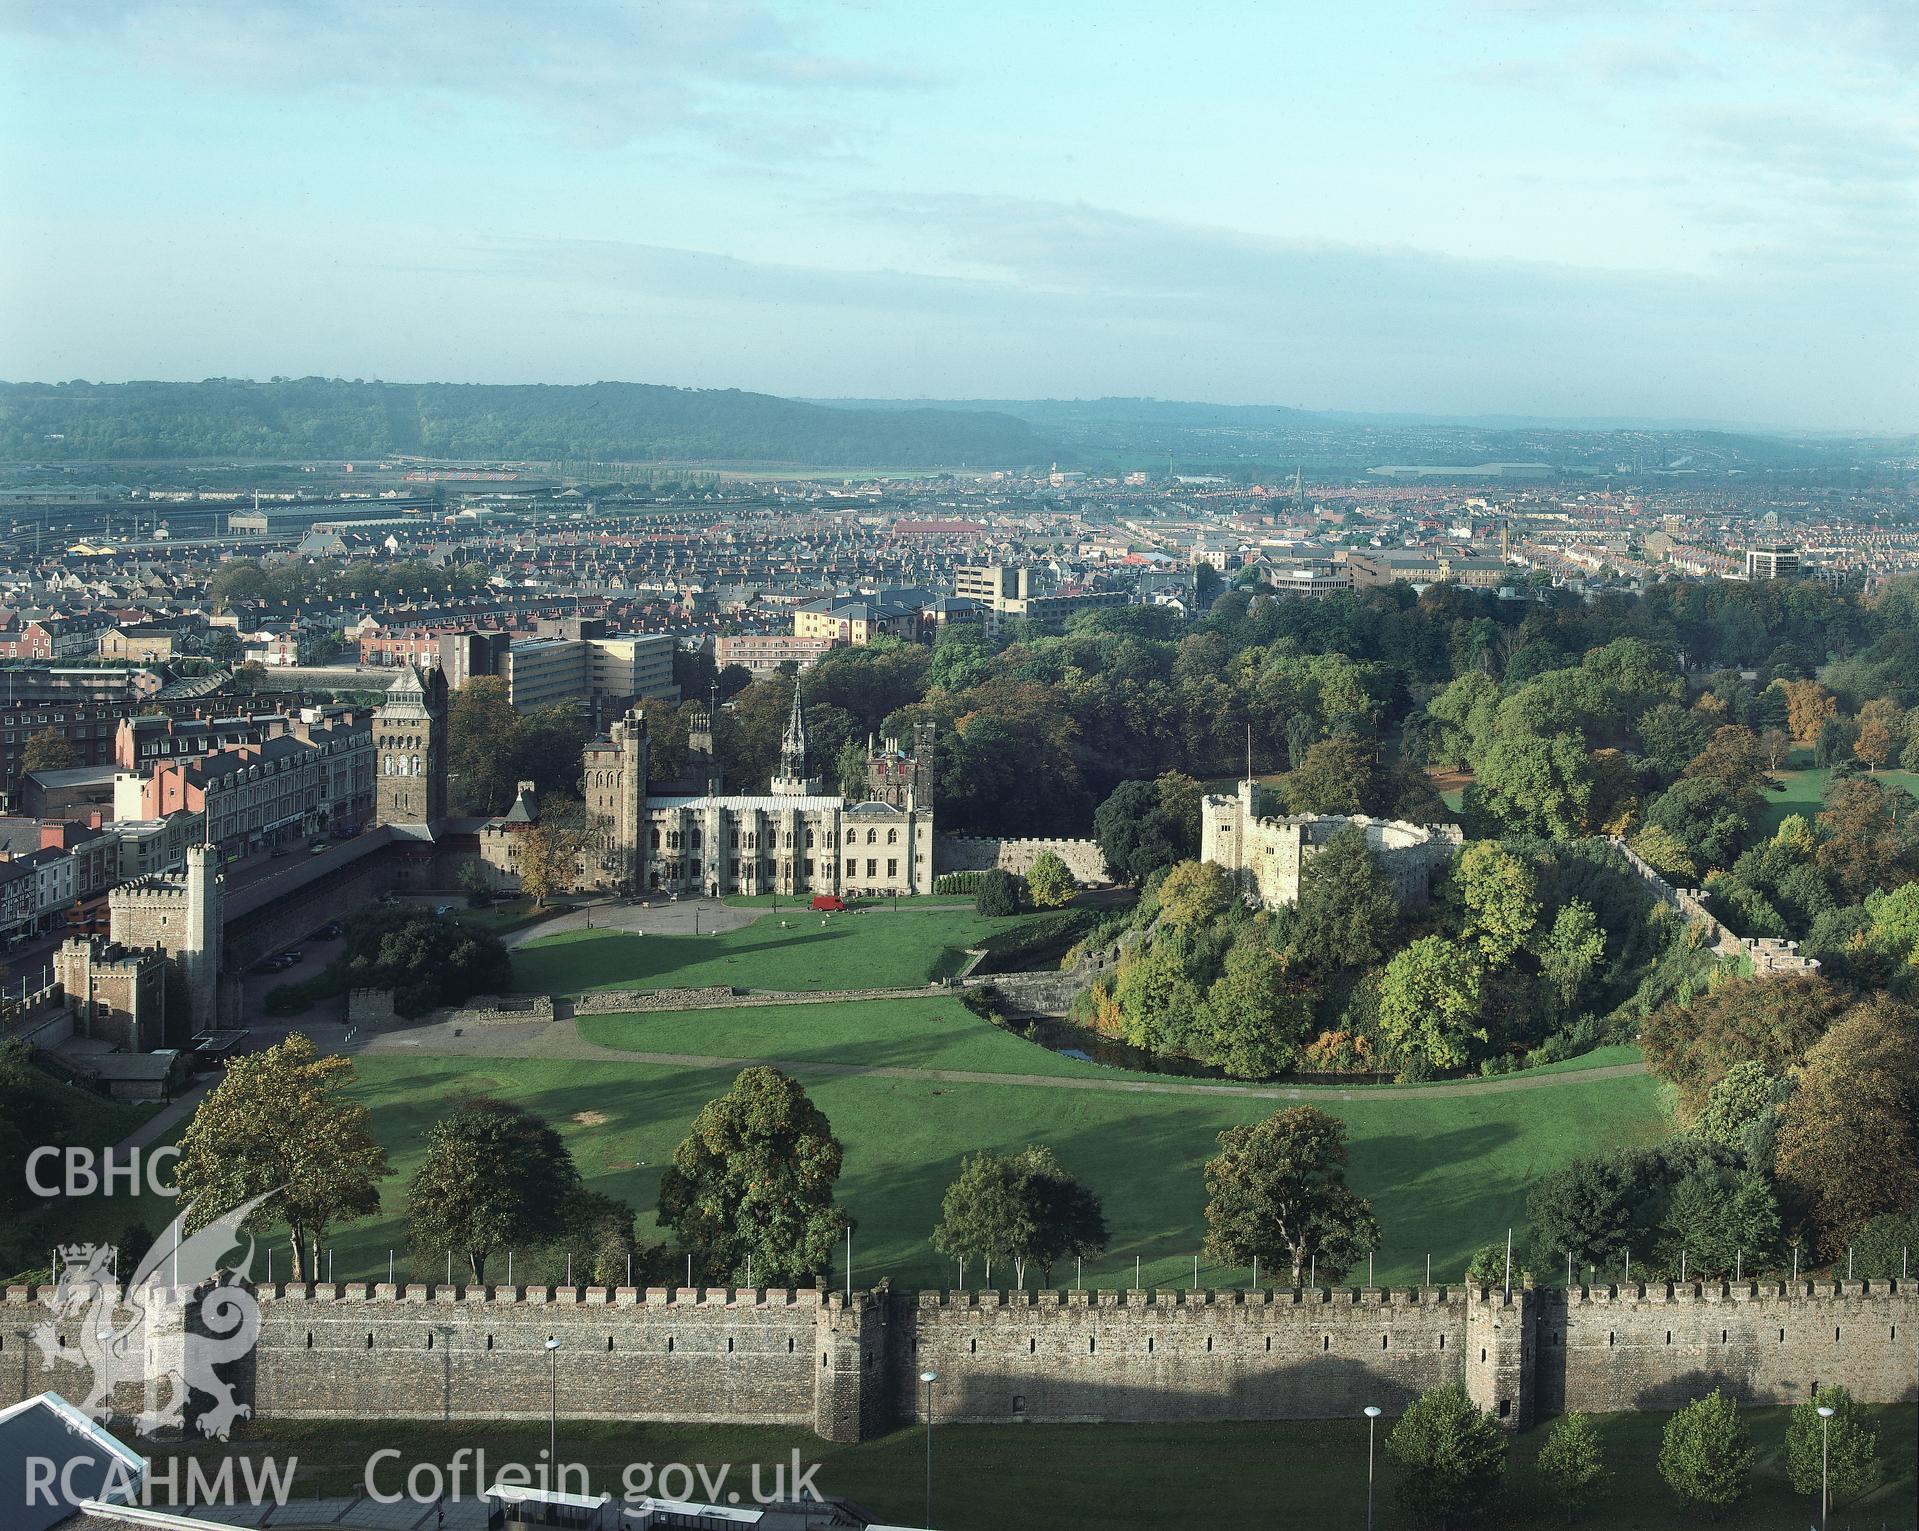 RCAHMW colour transparency of a general exterior view of Cardiff Castle, and castle walls, set in the Cardiff City landscape.